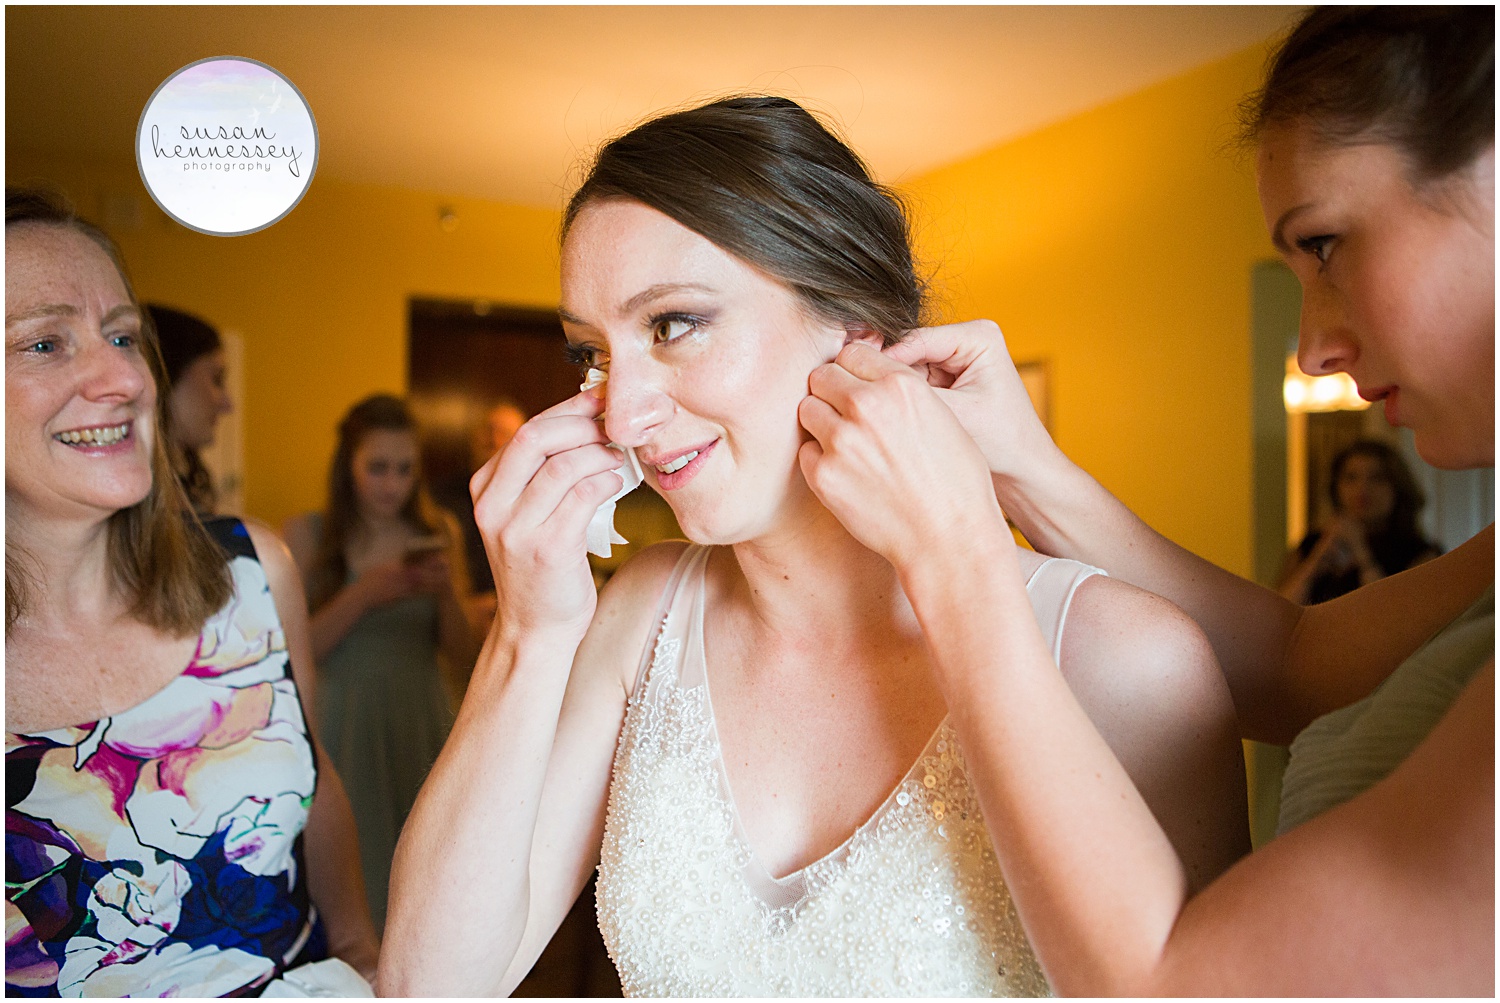 Emotional moment for bride on her wedding day while getting ready at Nassau Inn in Princeton